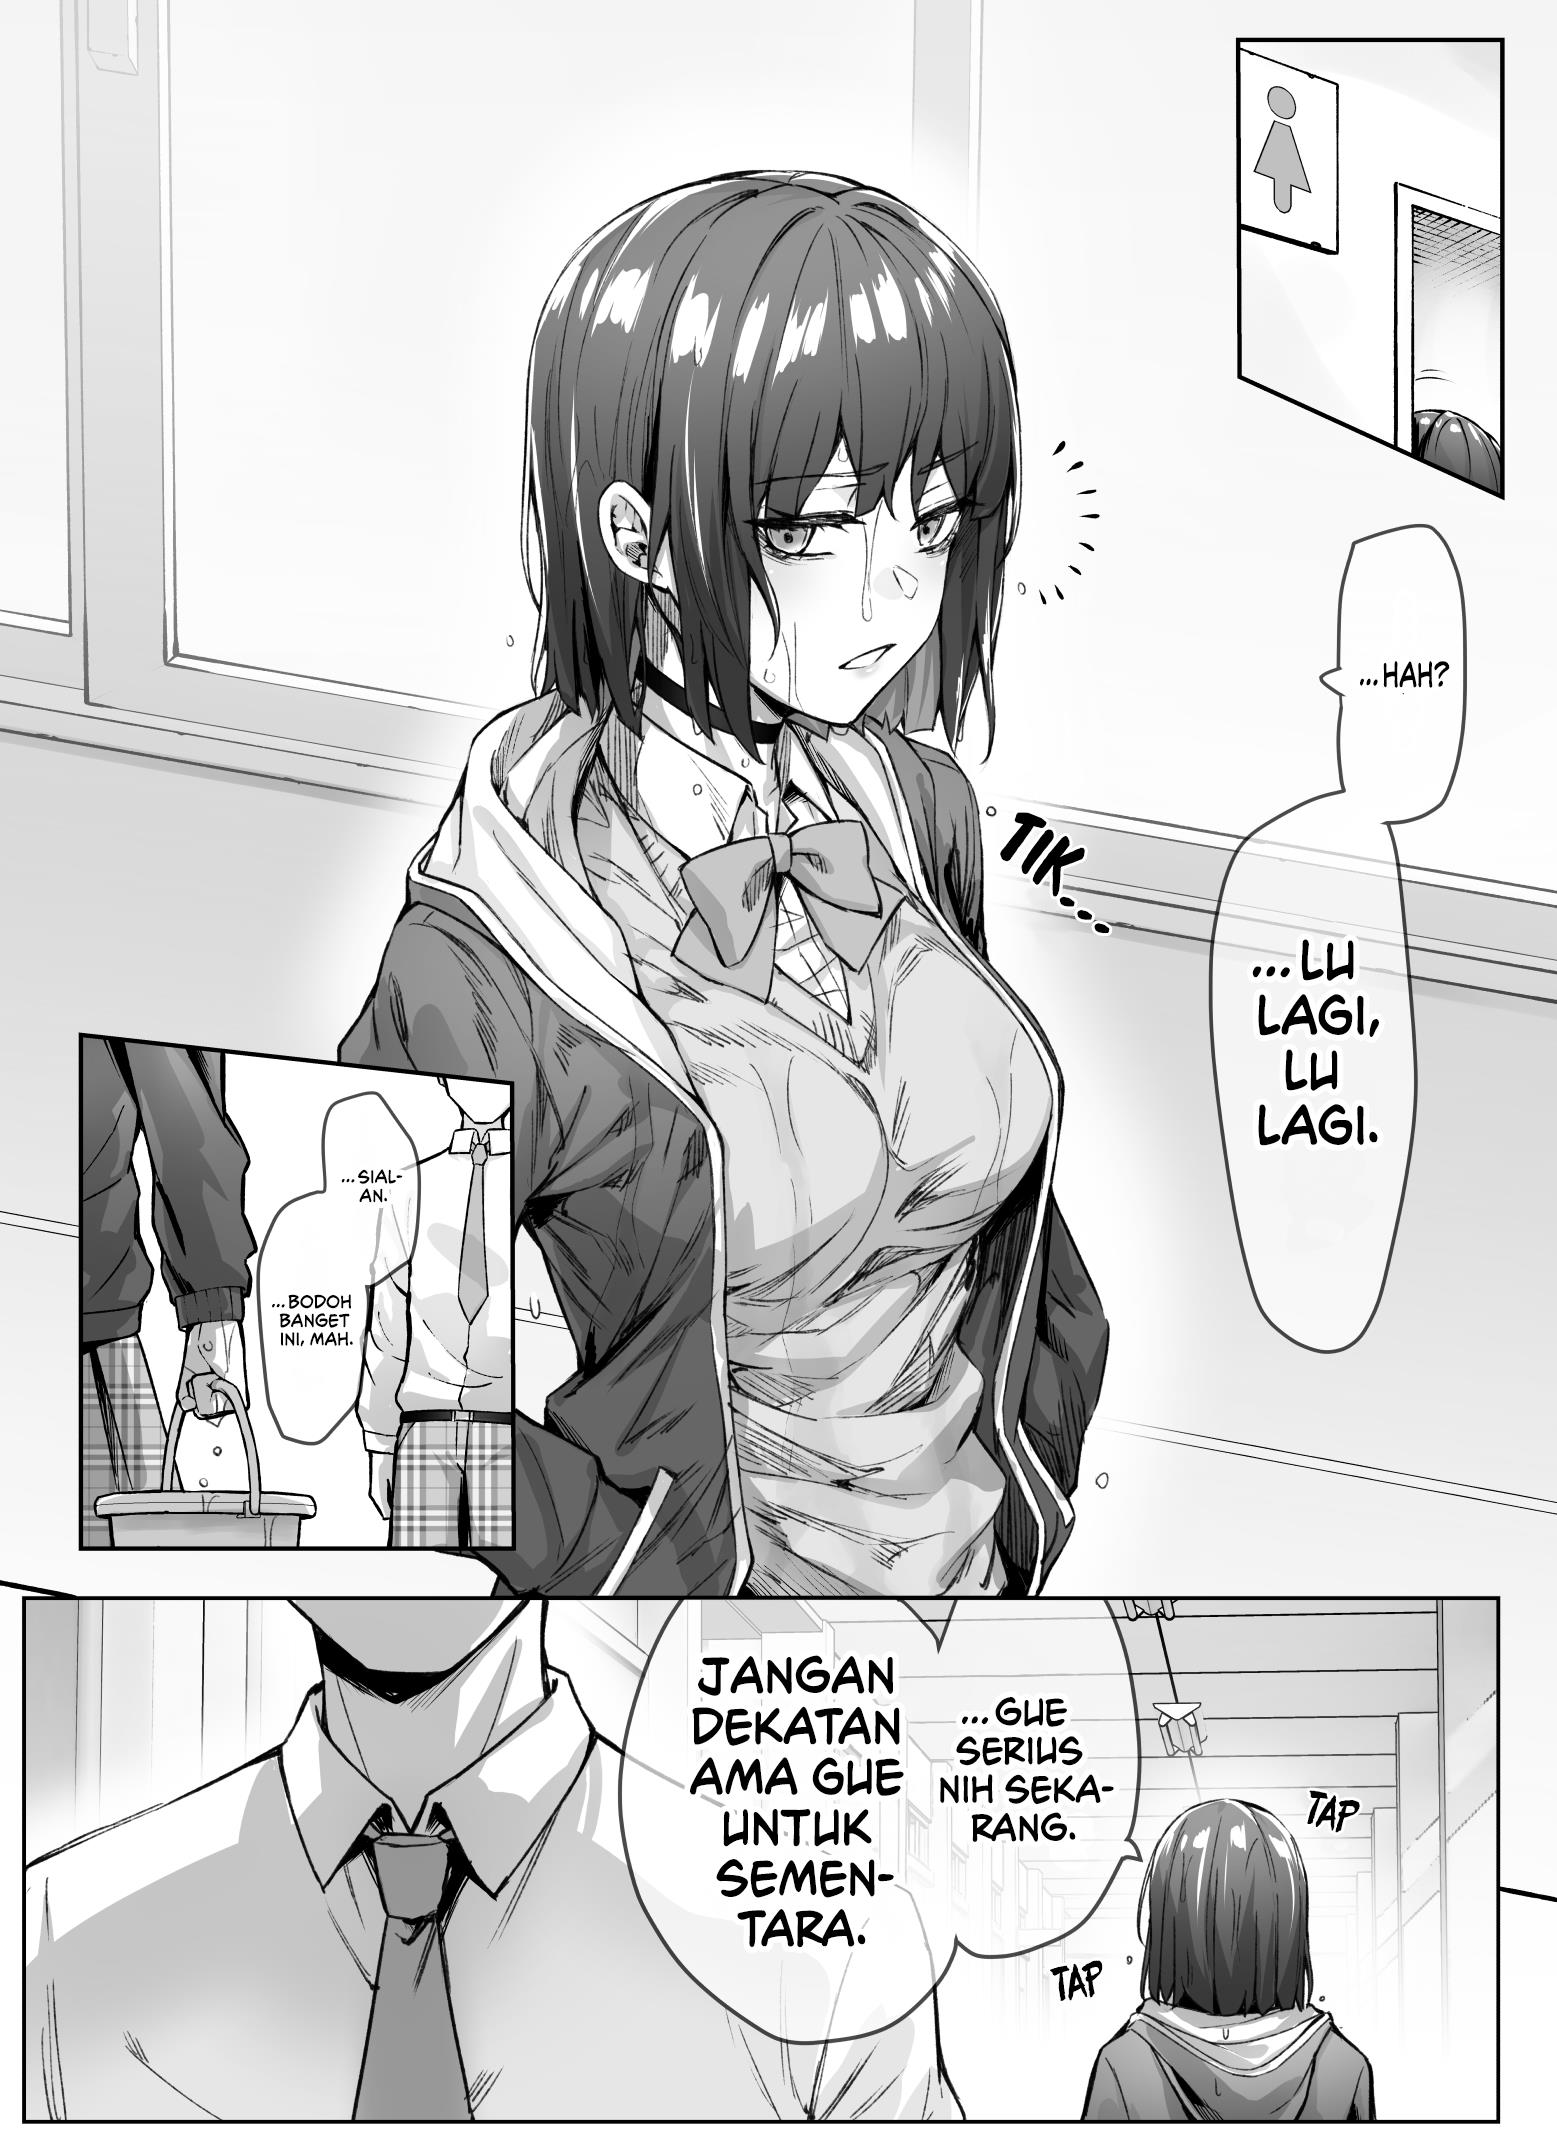 The Tsuntsuntsuntsuntsuntsun tsuntsuntsuntsuntsundere Girl Getting Less and Less Tsun Day by Day Chapter 9.2